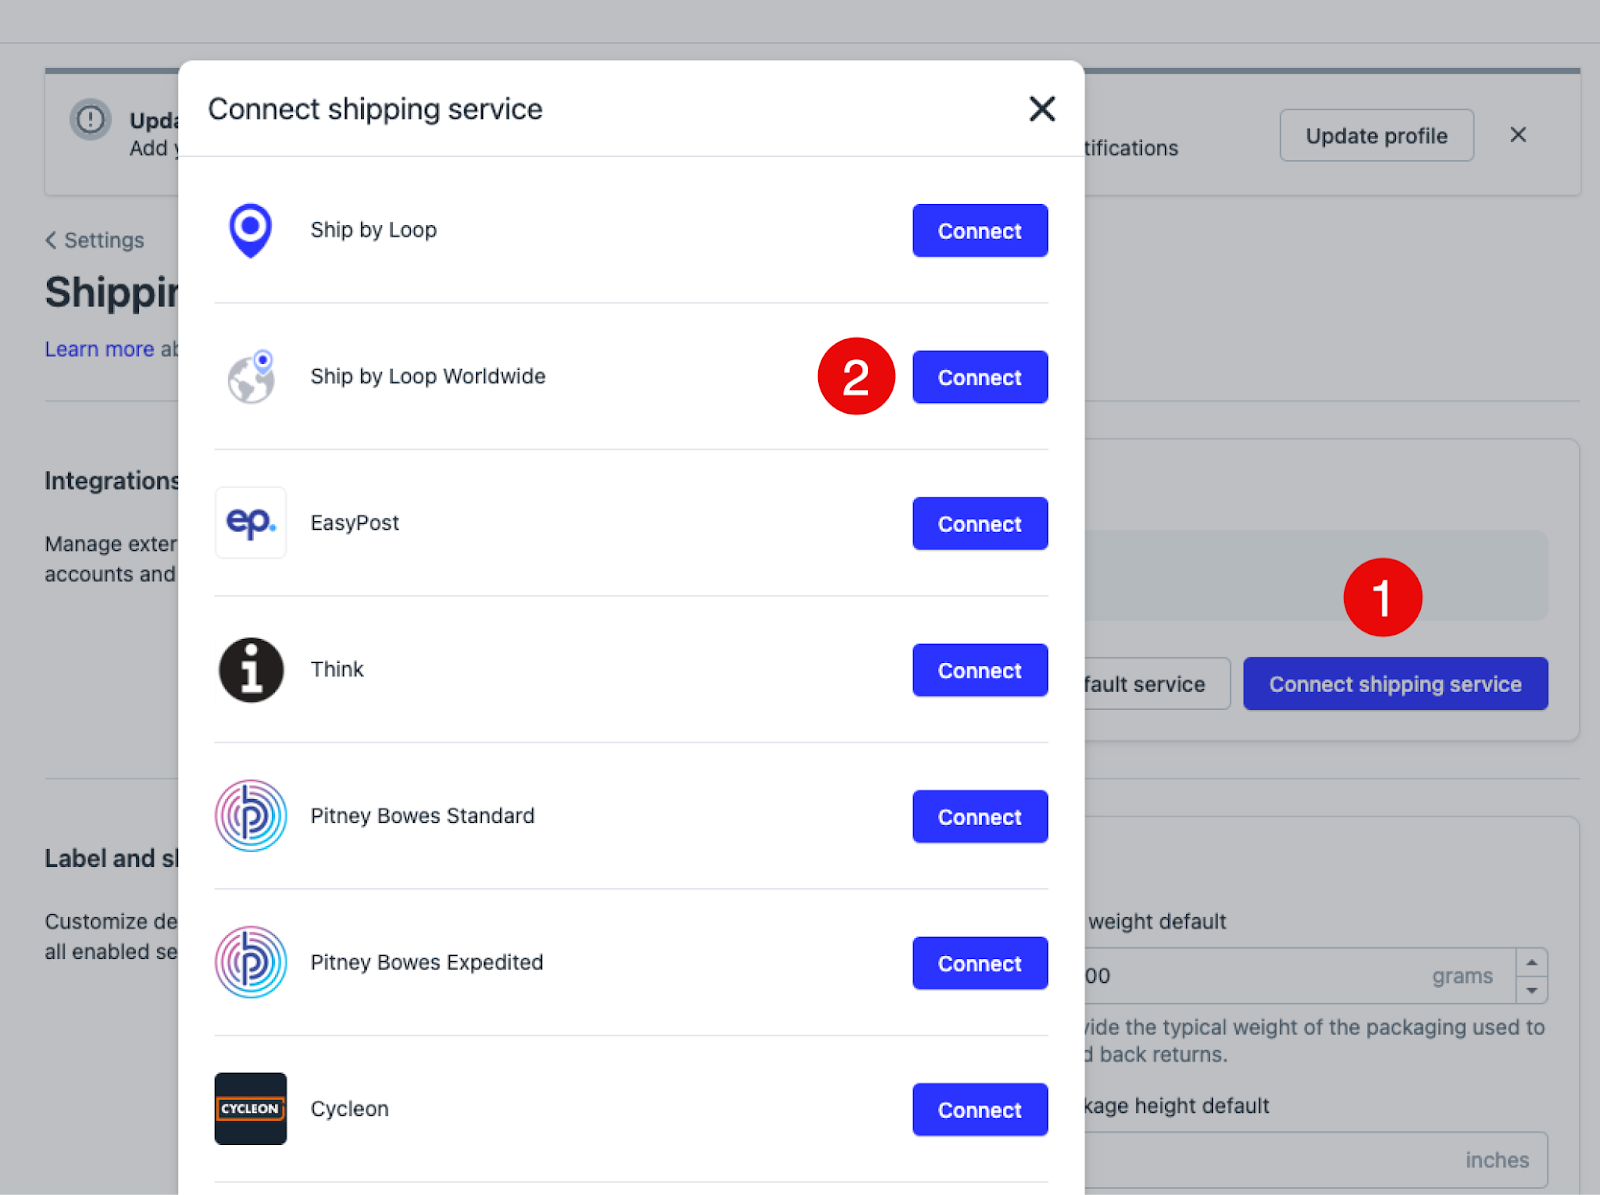 Shipping page in Loop admin with a Connect Shipping Service button, as well as a list of shipping services. These services including Ship by Loop Worldwide, which has a Connect button next to it.